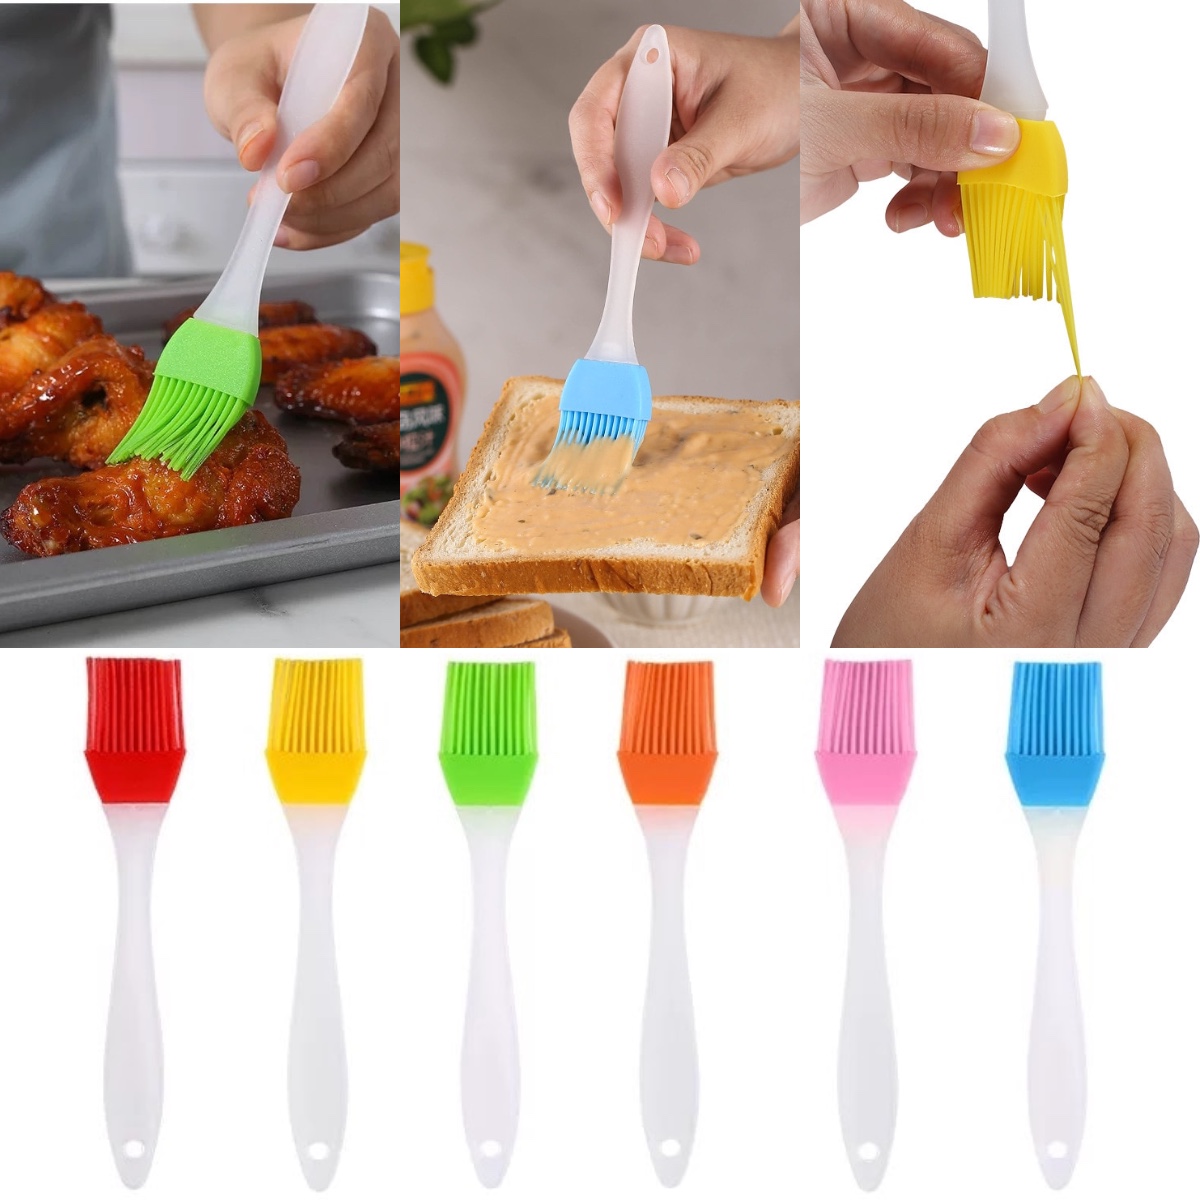 Silicone Grill Brush Bread Baking Tools Pastry Oil Cooking Smear BBQ Accessories Camping Baking Pan Oil Brush Kitchen Gadgets